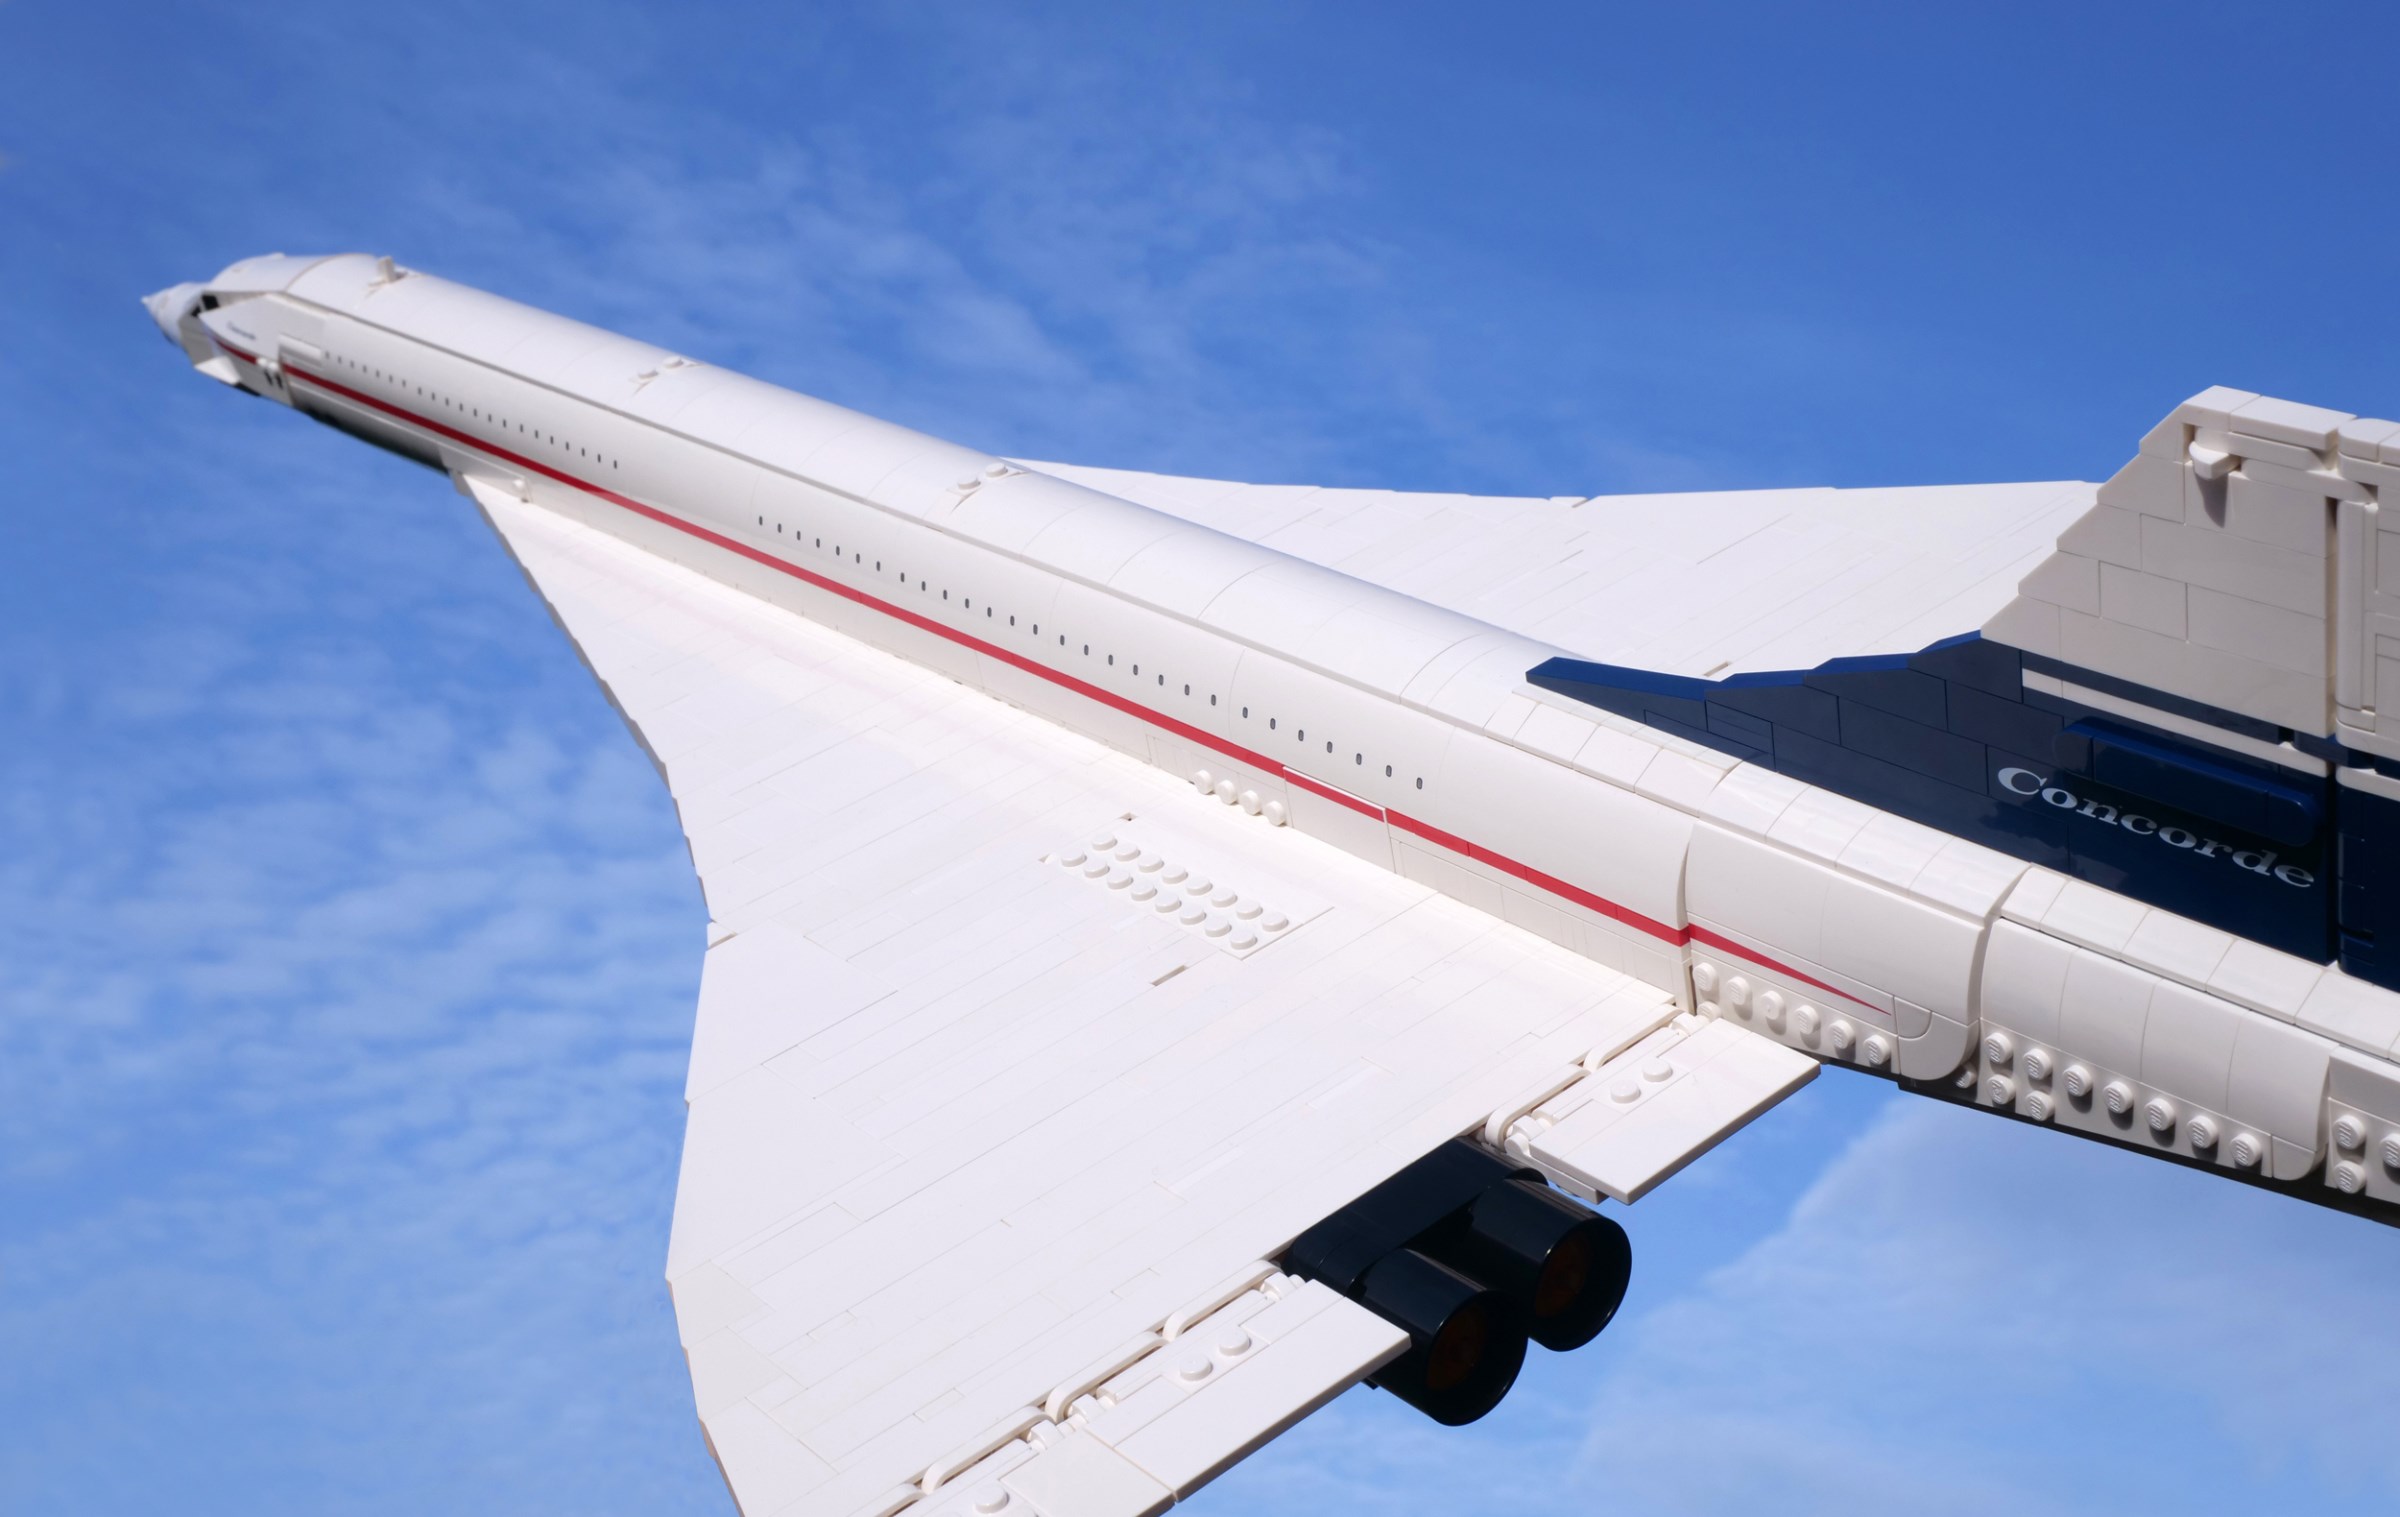 What Is the Lego Concorde Set? Learn About the History of Concorde